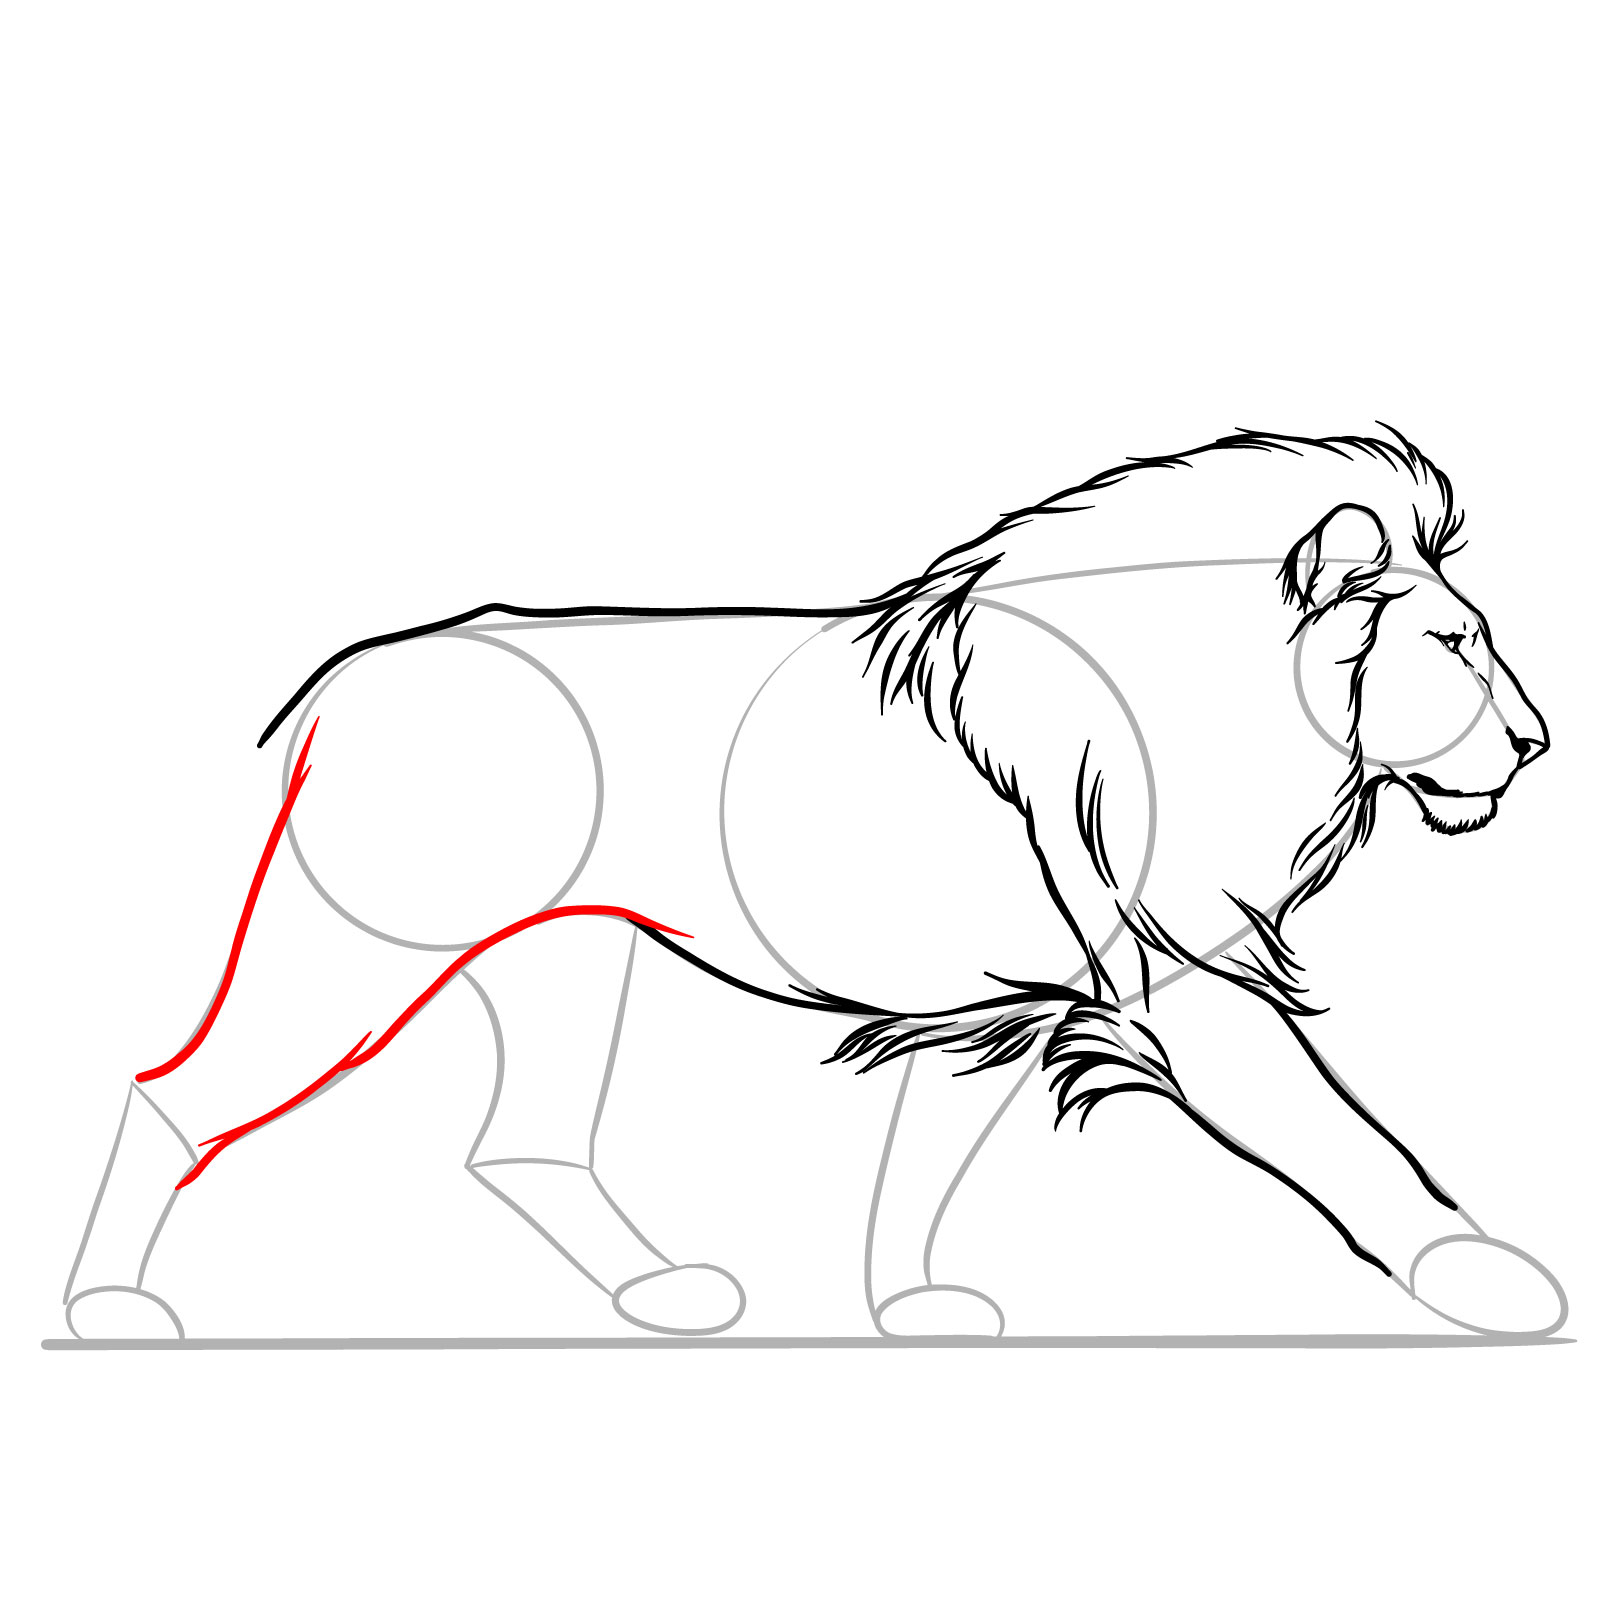 Illustration steps for the upper part of the hind leg in a walking lion sketch - step 09